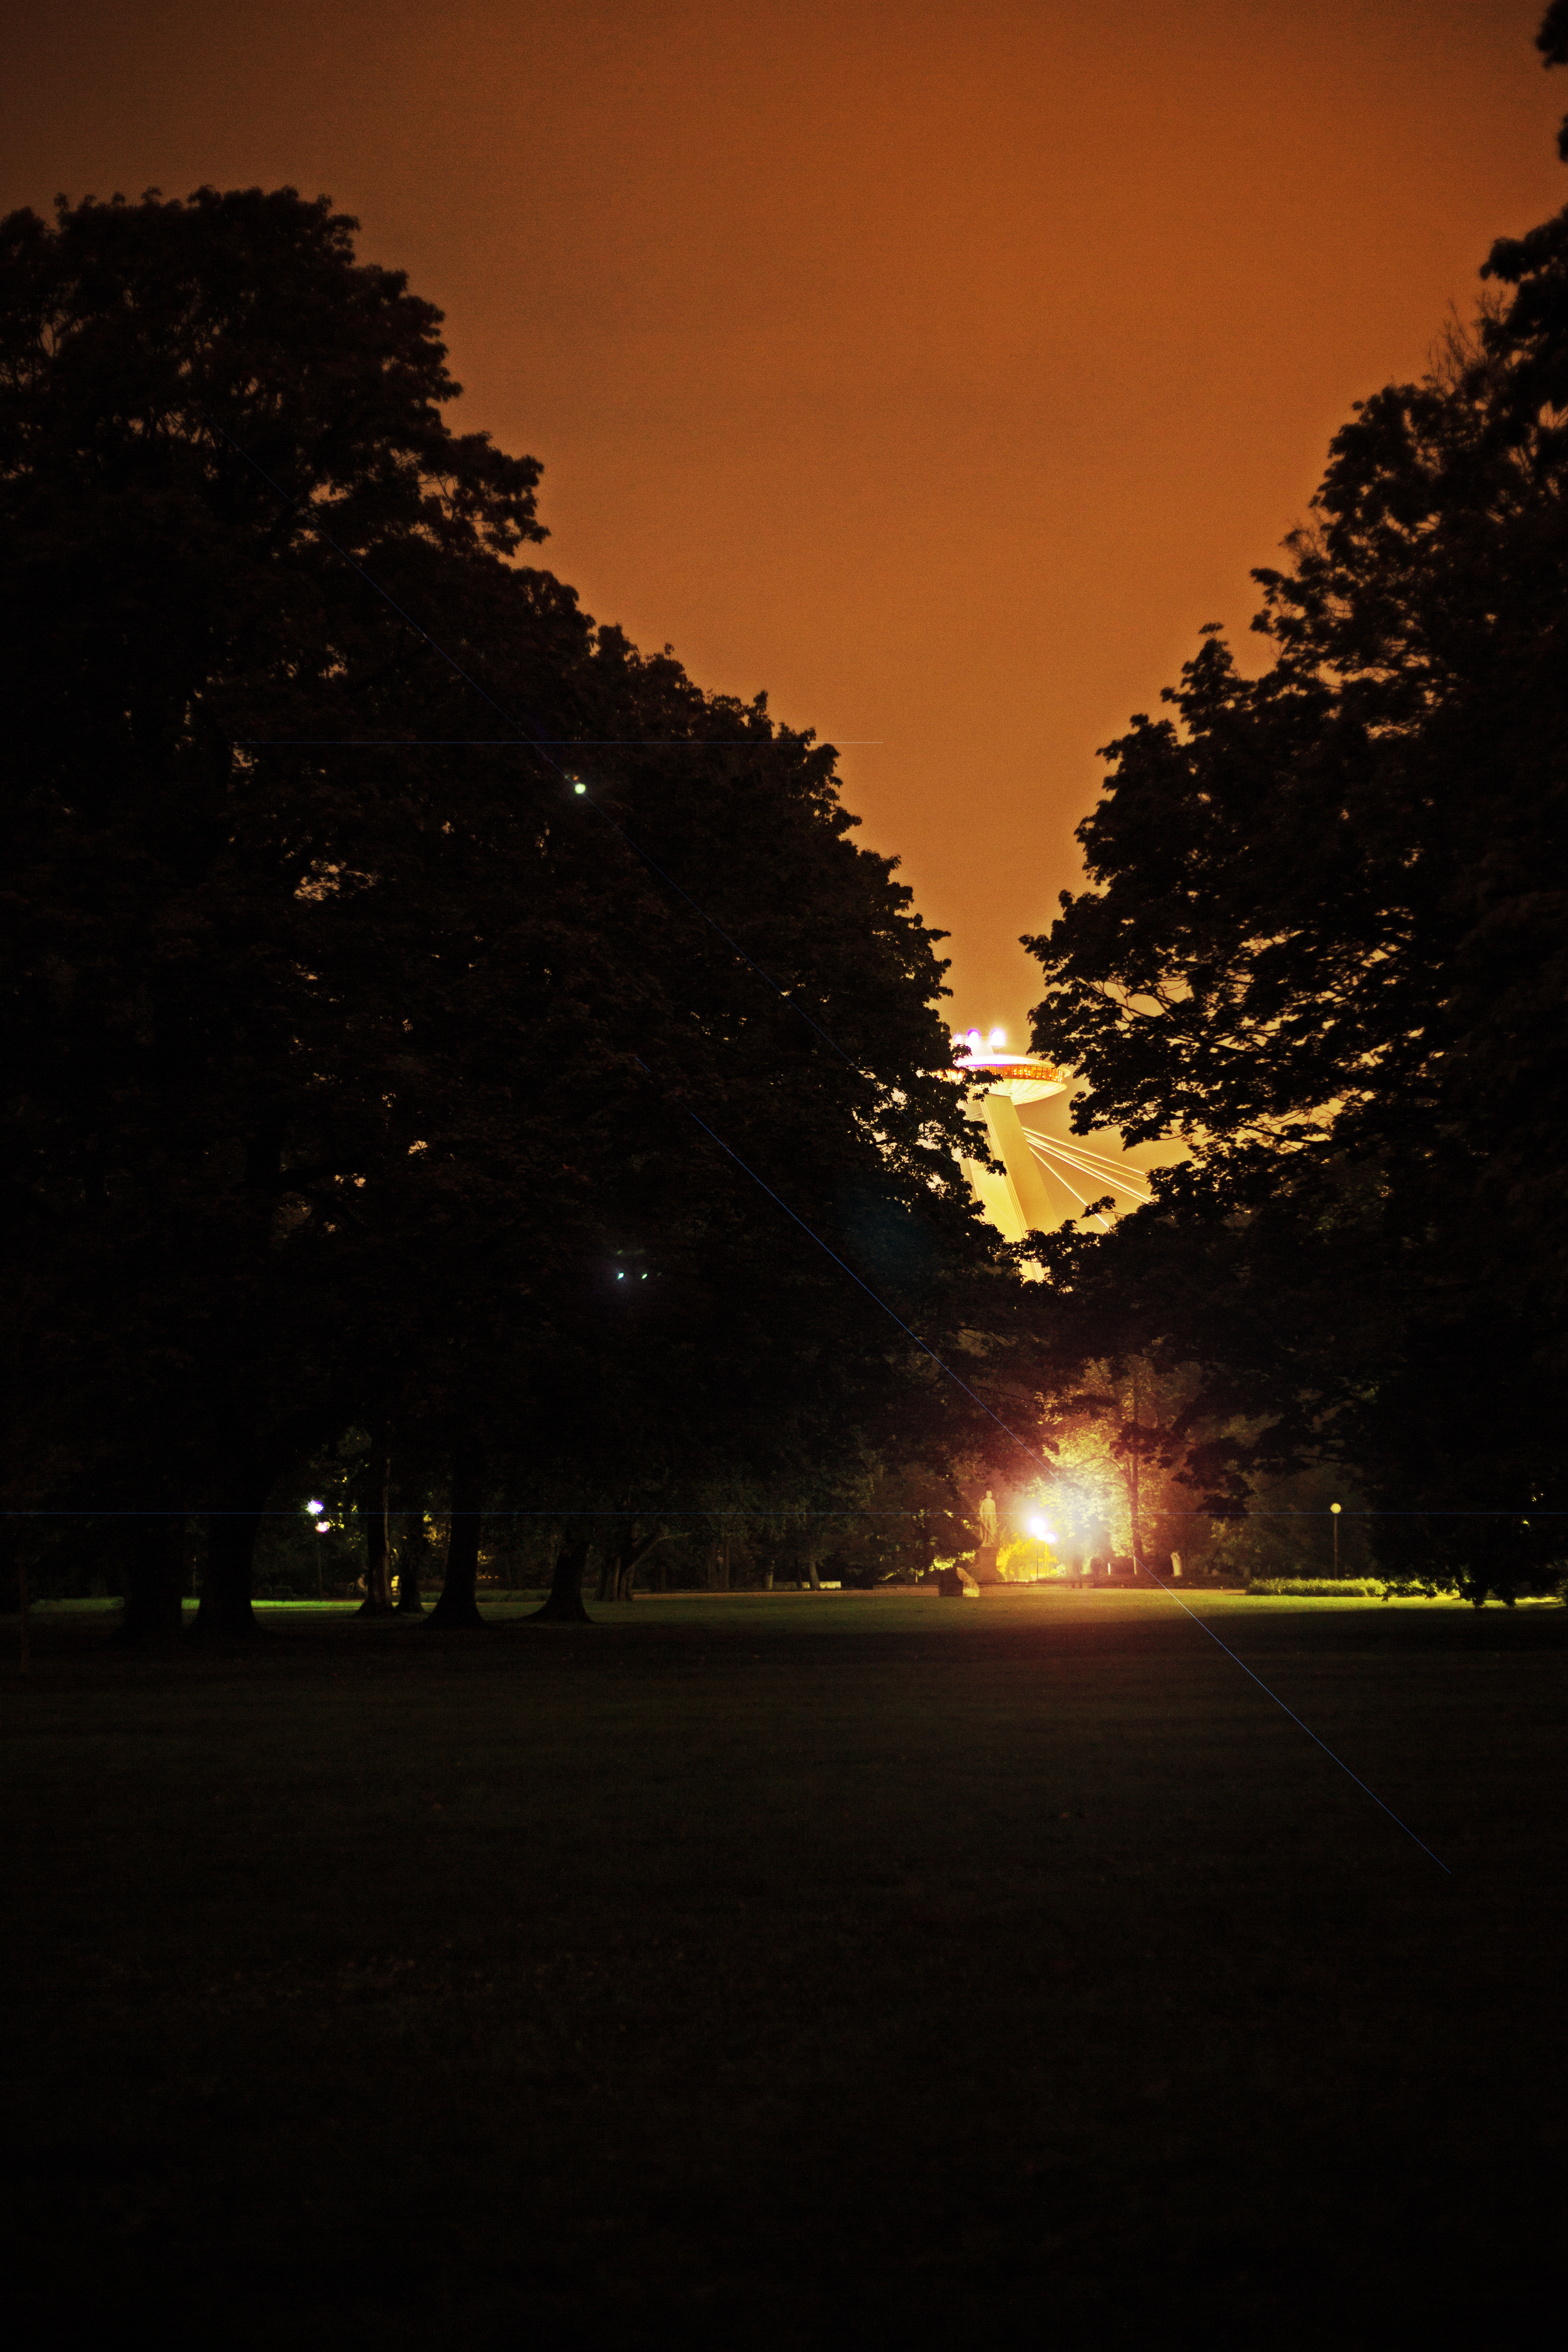 Night in the park photo